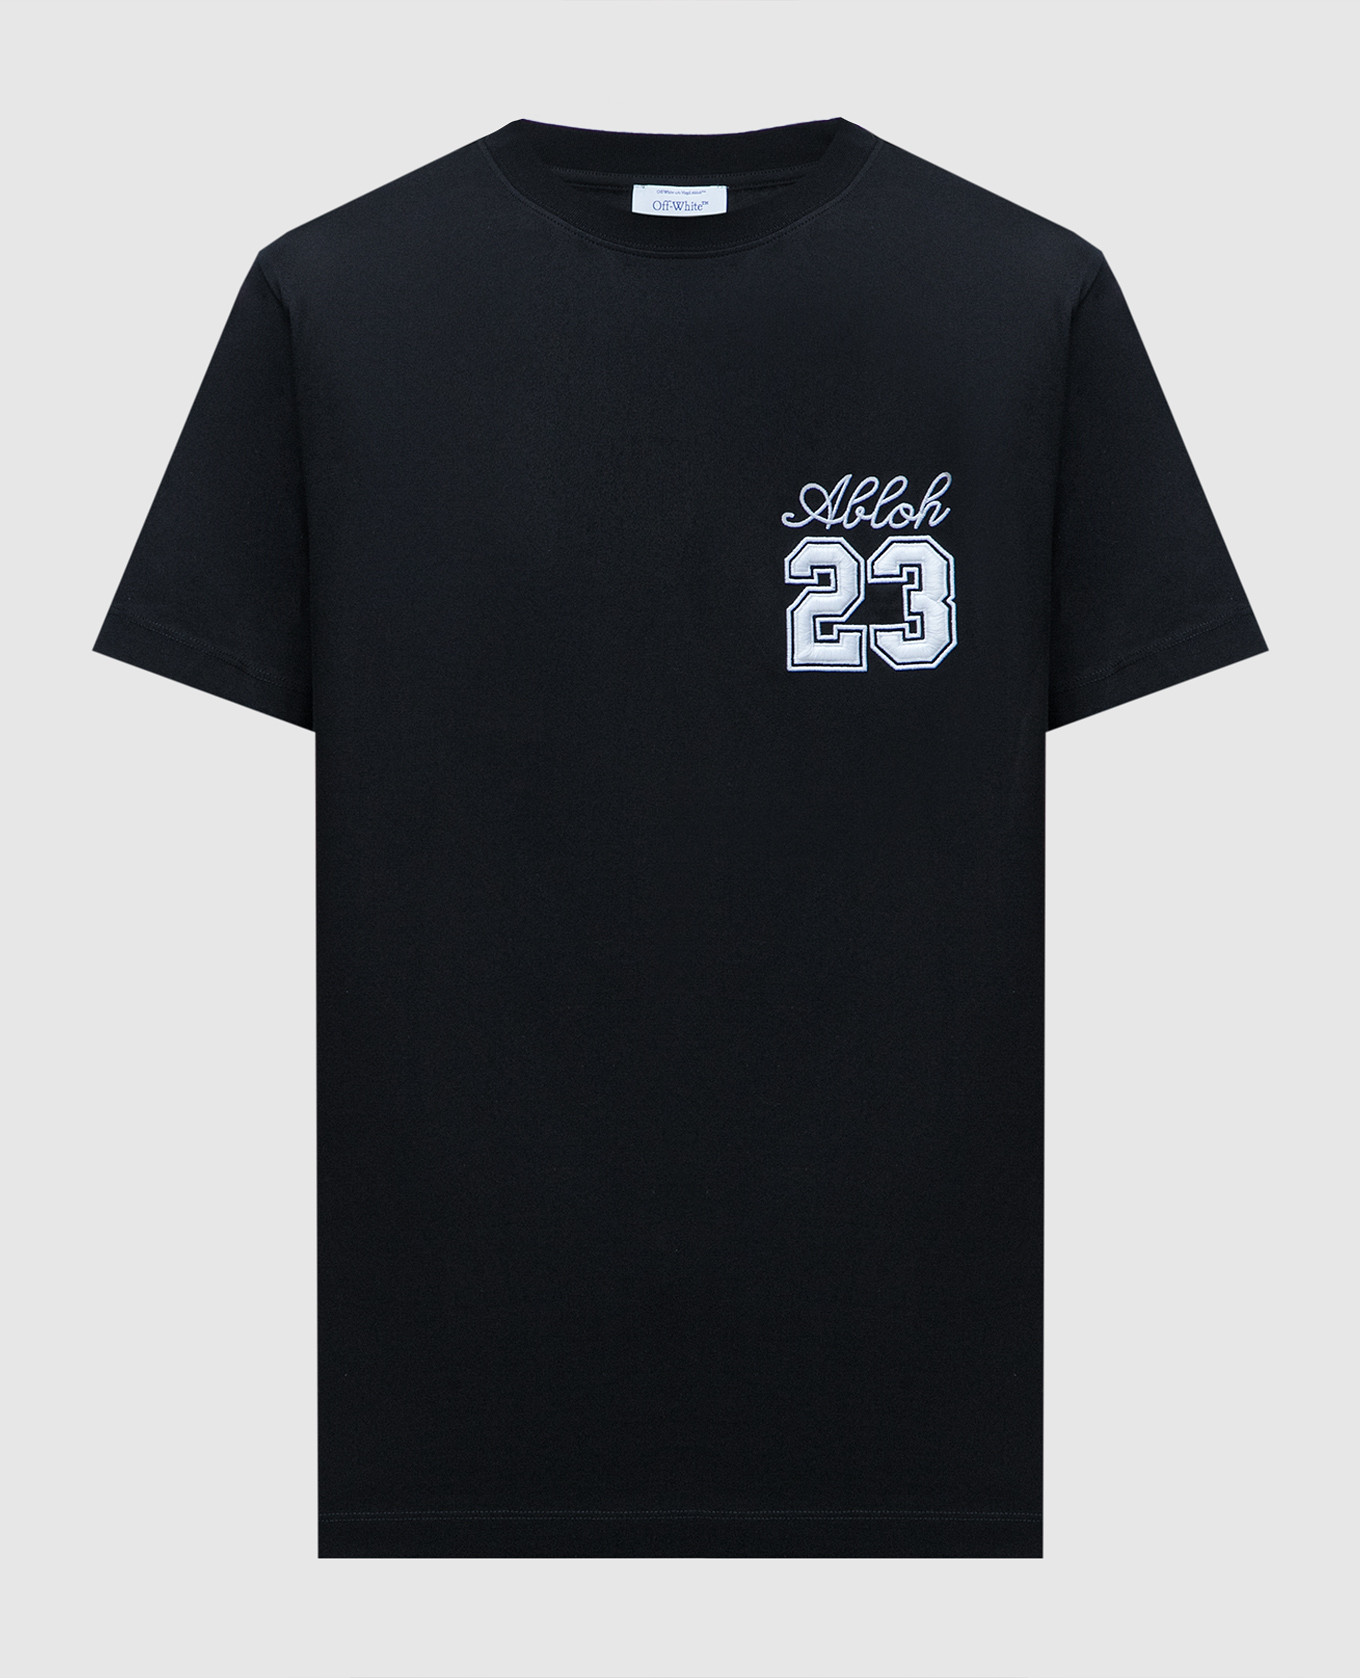 Black t-shirt with 23 Logo embroidery